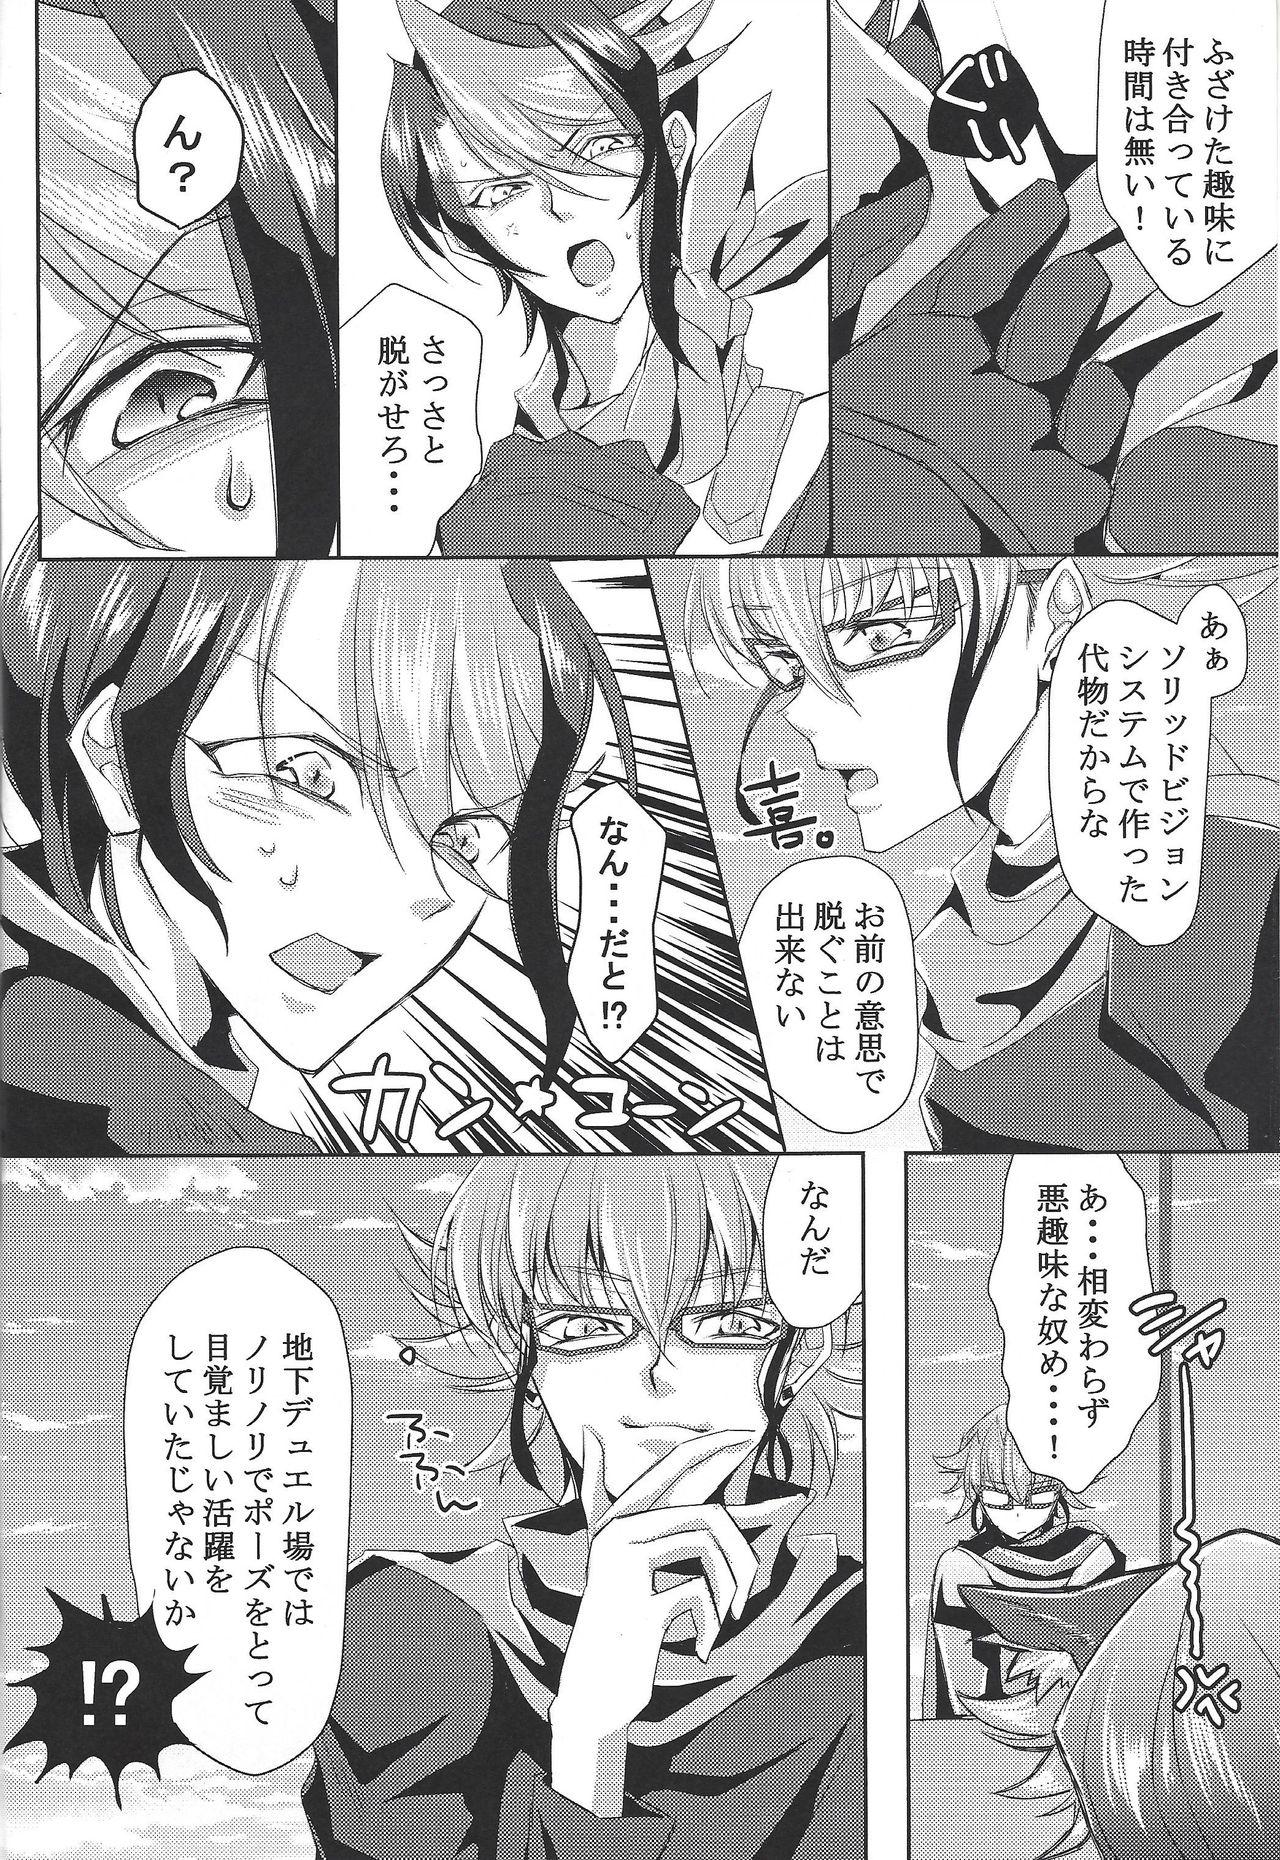 Muscle Shukuteki to! Riding Duel! - Yu-gi-oh arc-v Roughsex - Page 3